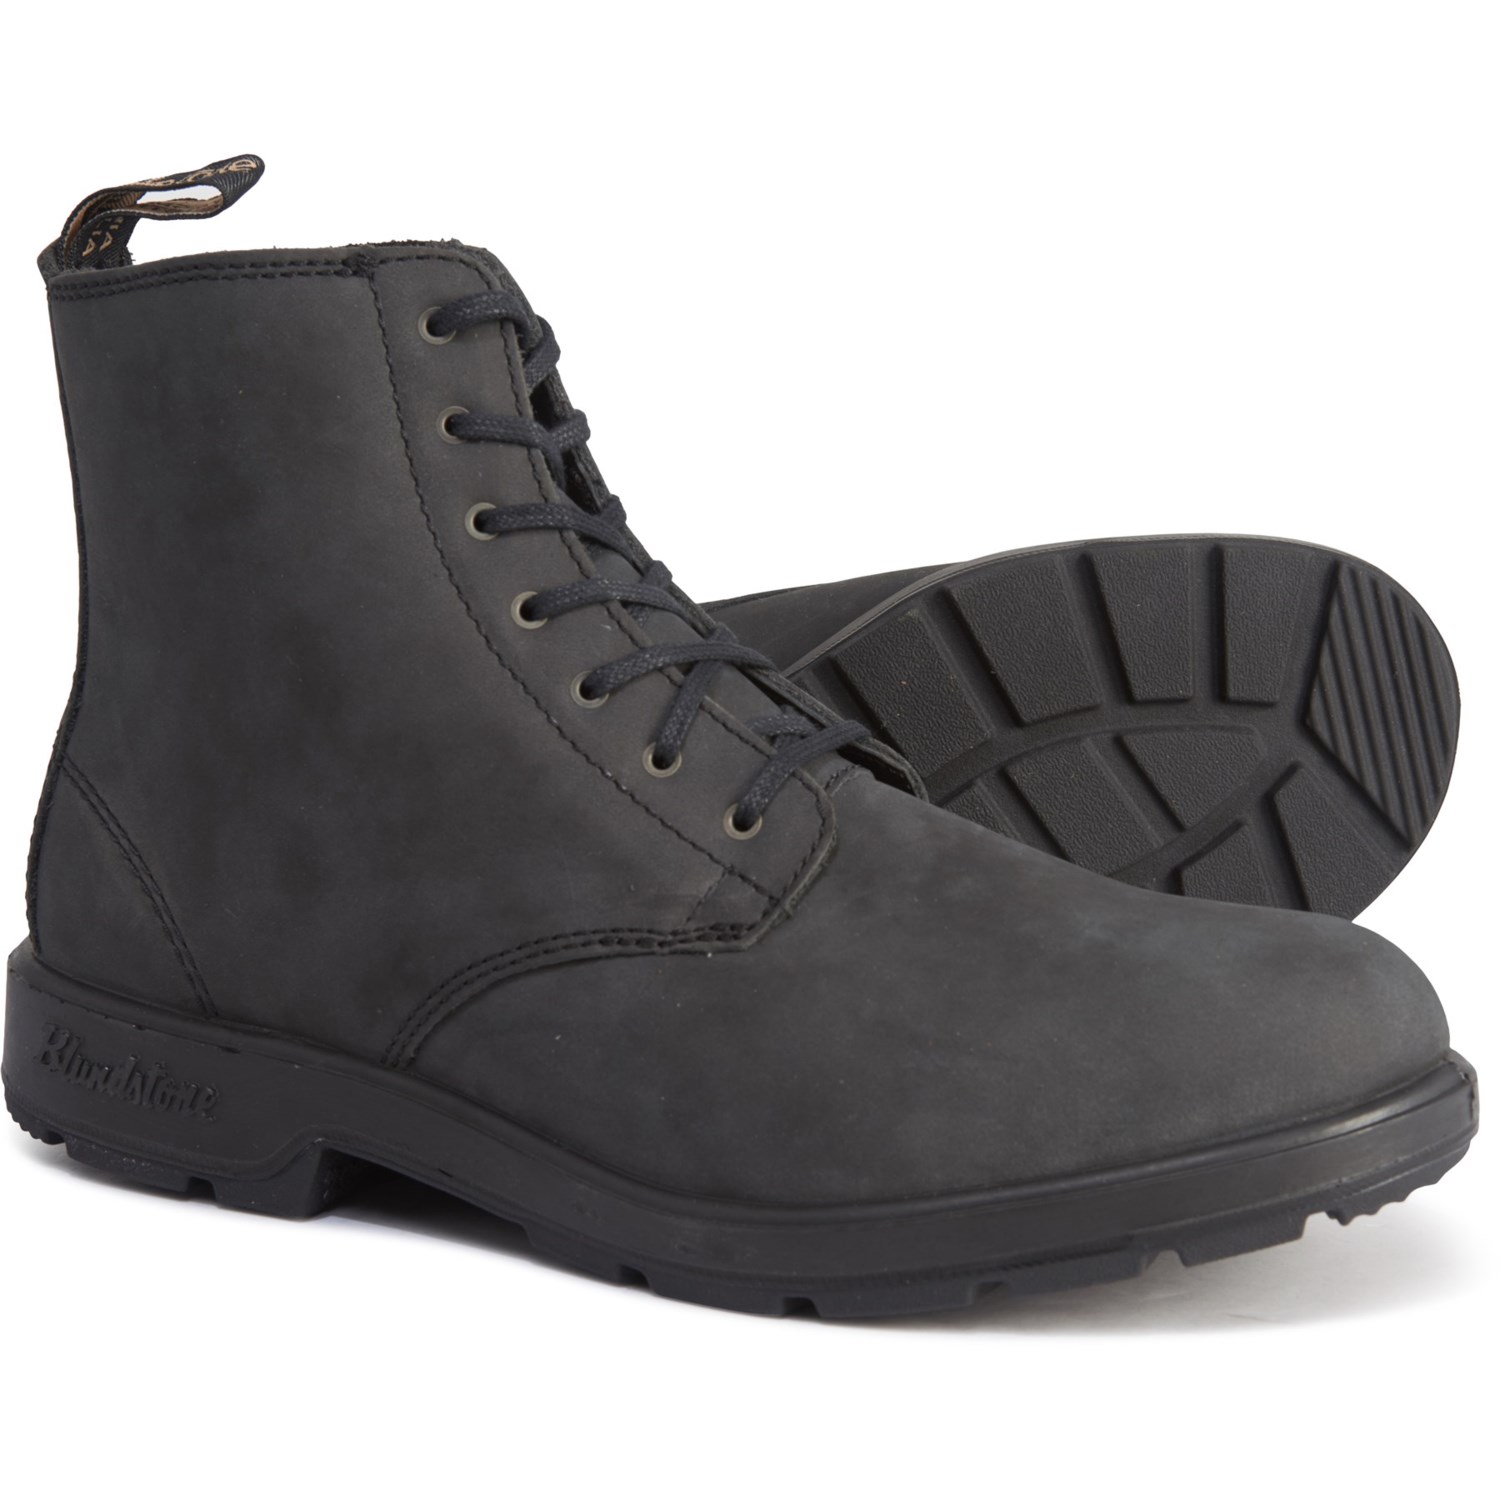 blundstone lace up boots review